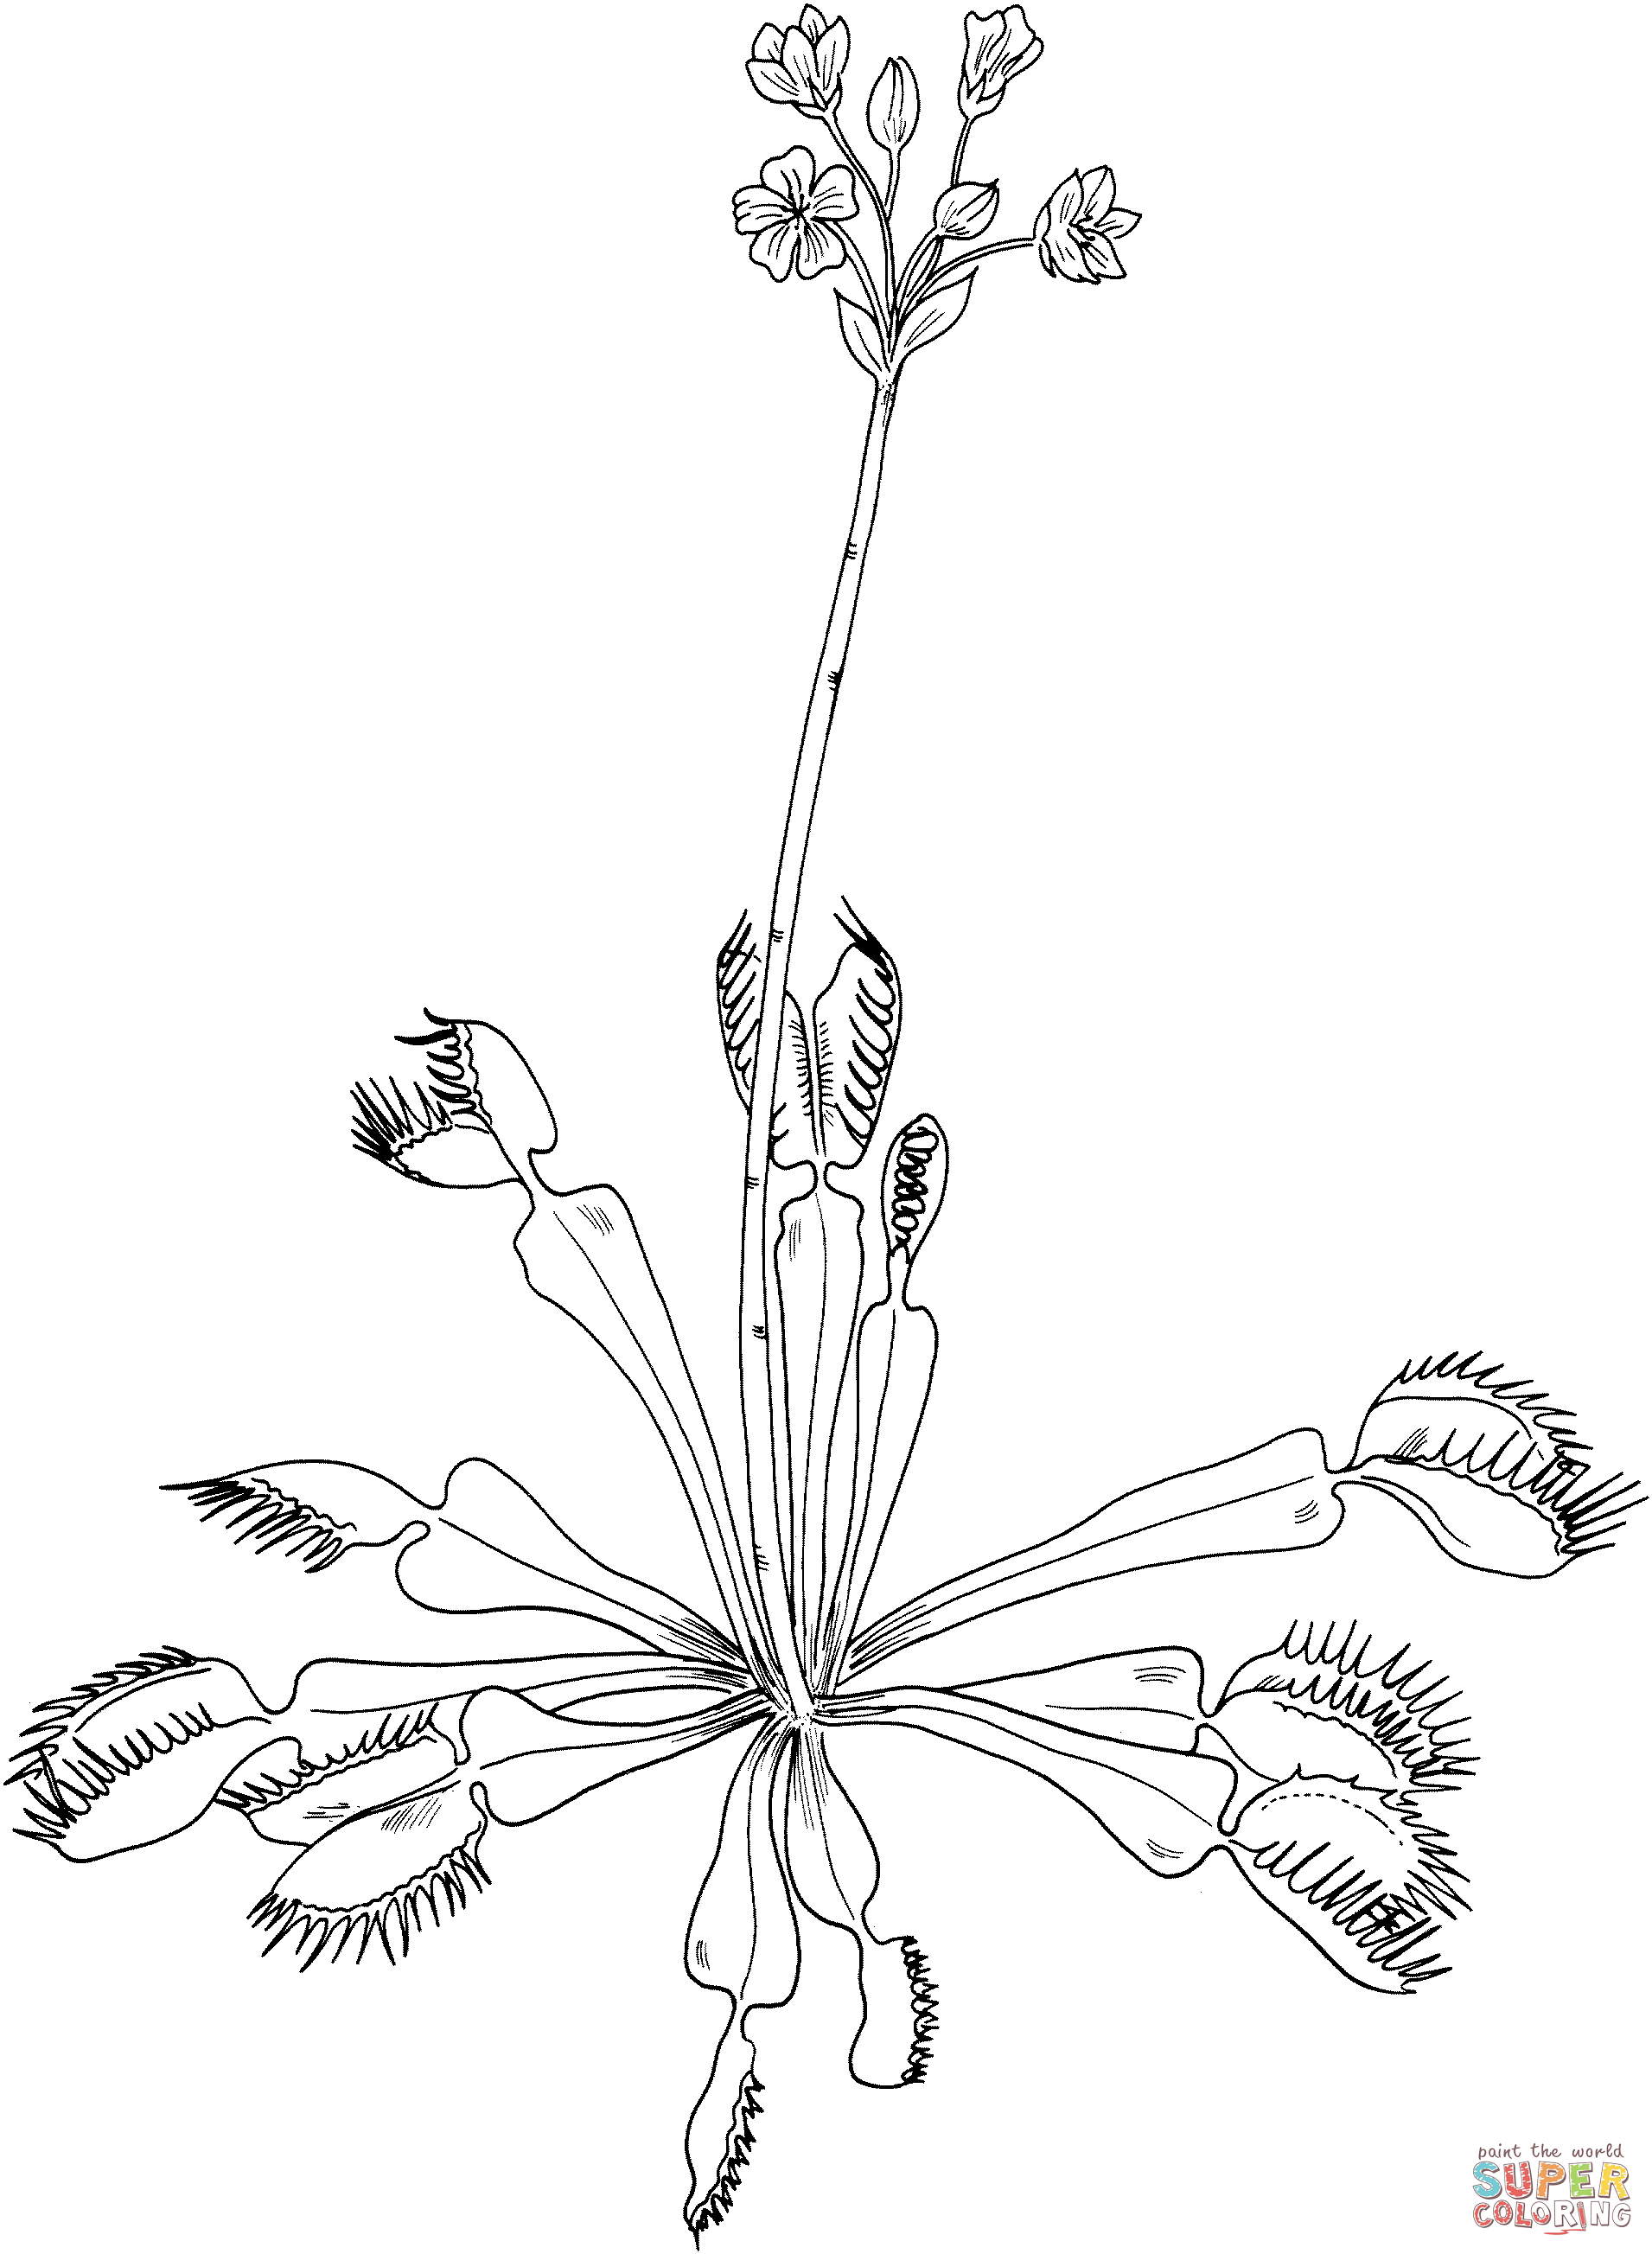 Venus Fly Trap coloring page | Free Printable Coloring Pages